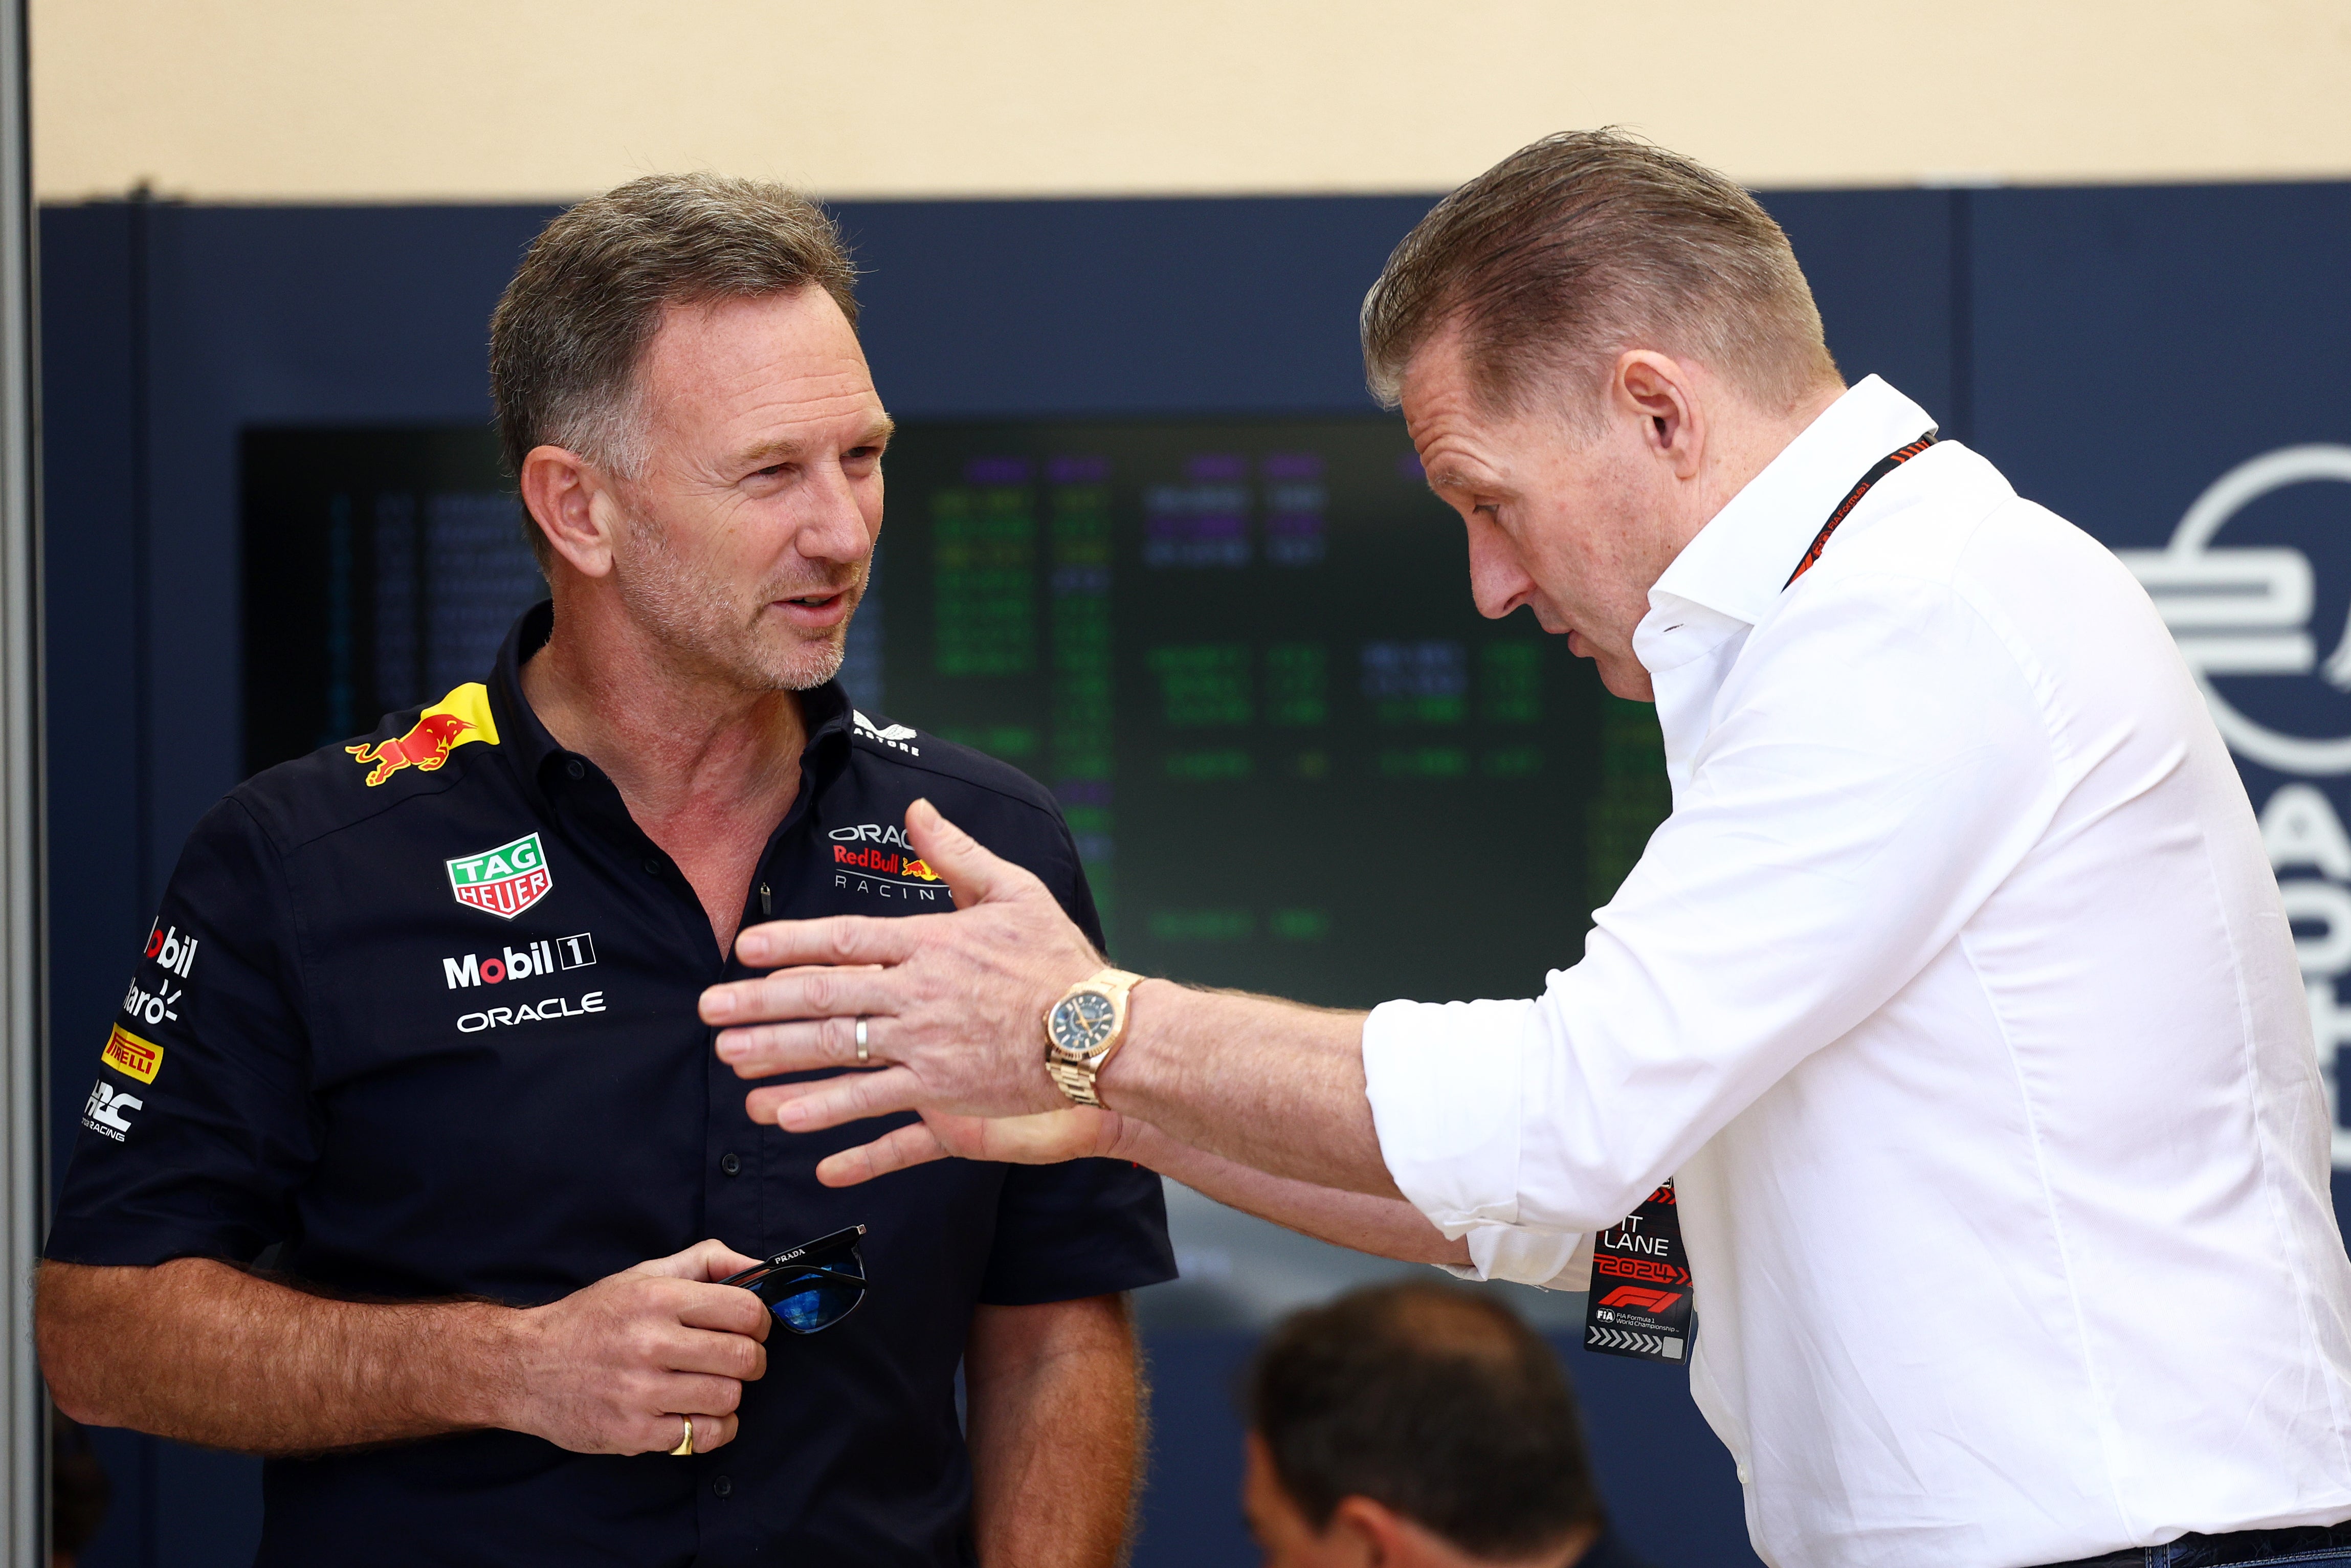 Jos Verstappen said Red Bull would ‘explode’ if Horner stayed in his position